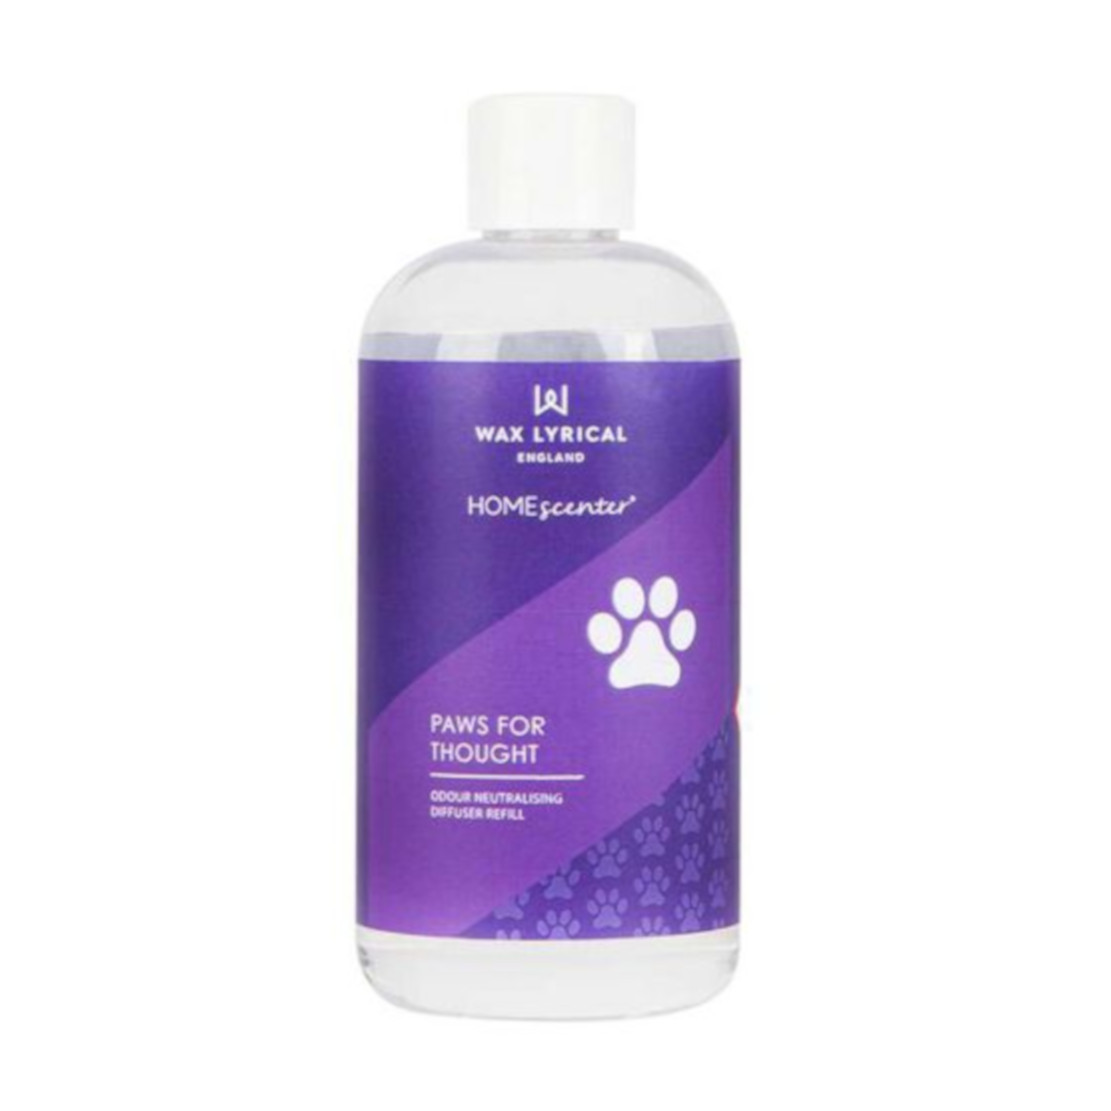 Wax Lyrical Paws for Thought 200ml Reed Diffuser Refill